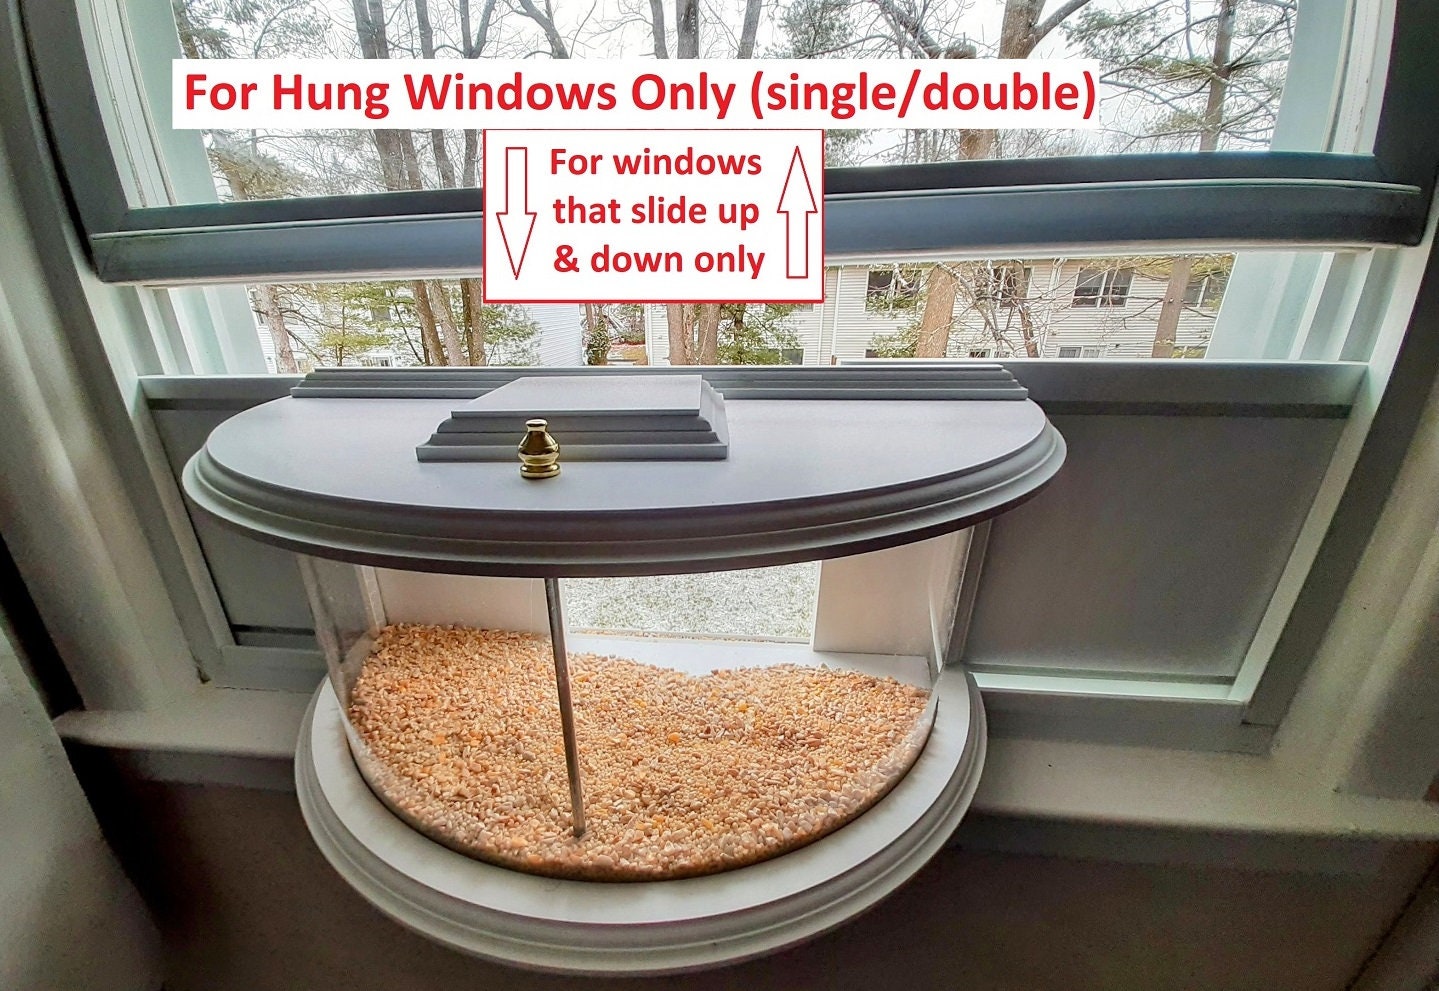  EMAISTORE Window Bird Feeder with a 180° View from